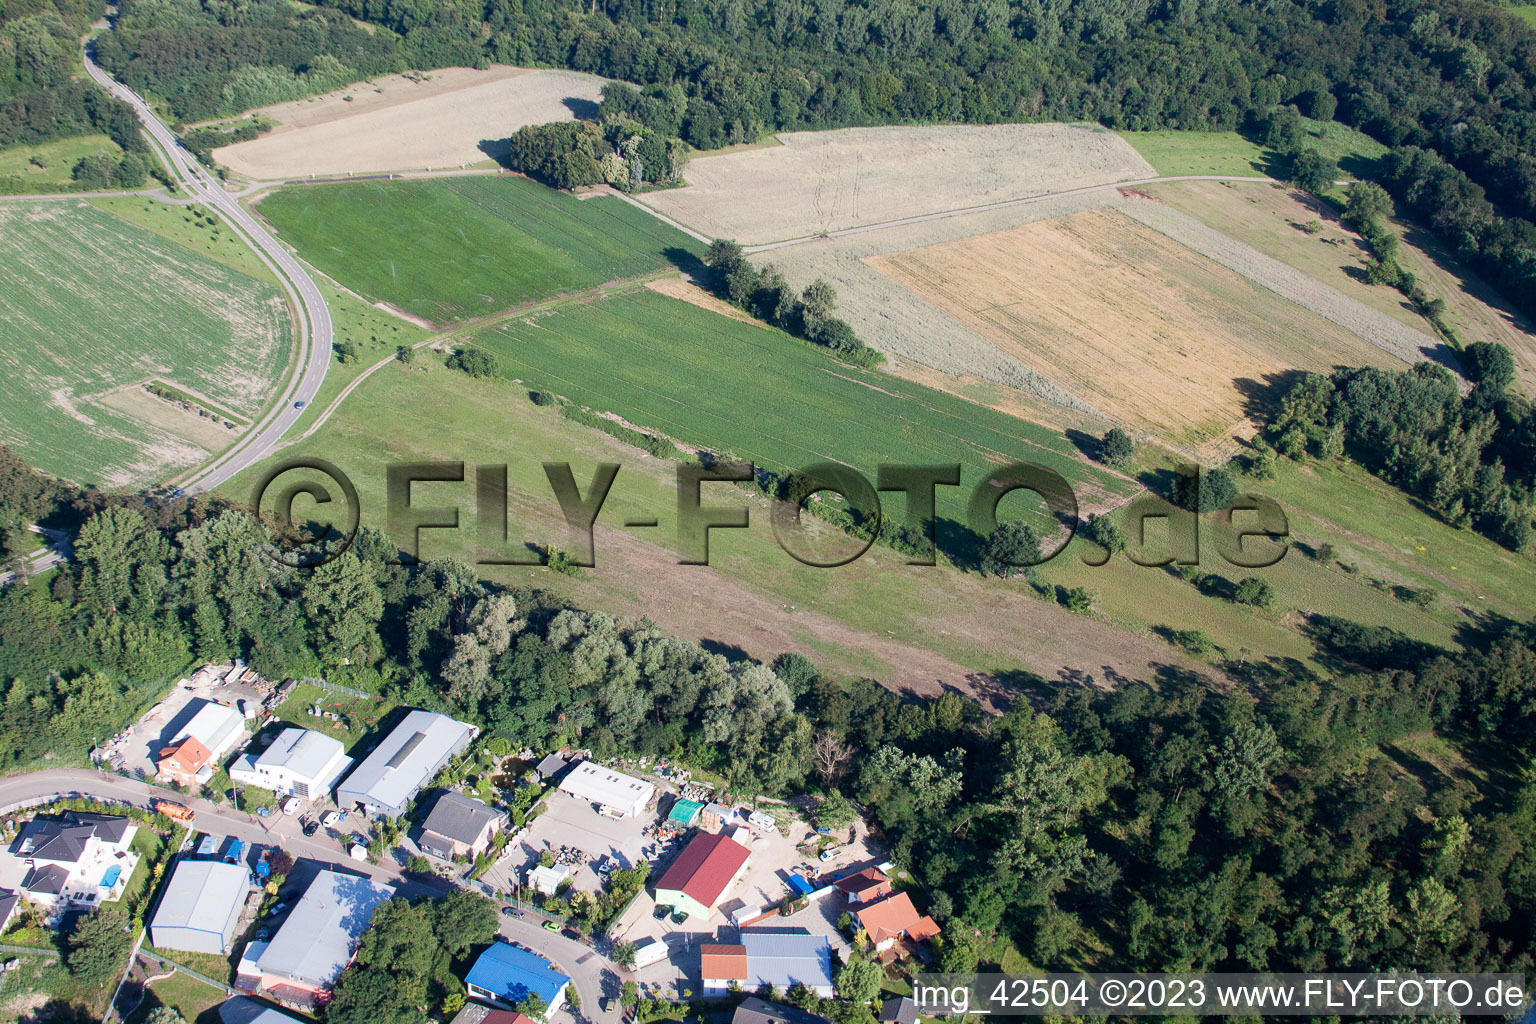 Aerial photograpy of Clay pit in Jockgrim in the state Rhineland-Palatinate, Germany